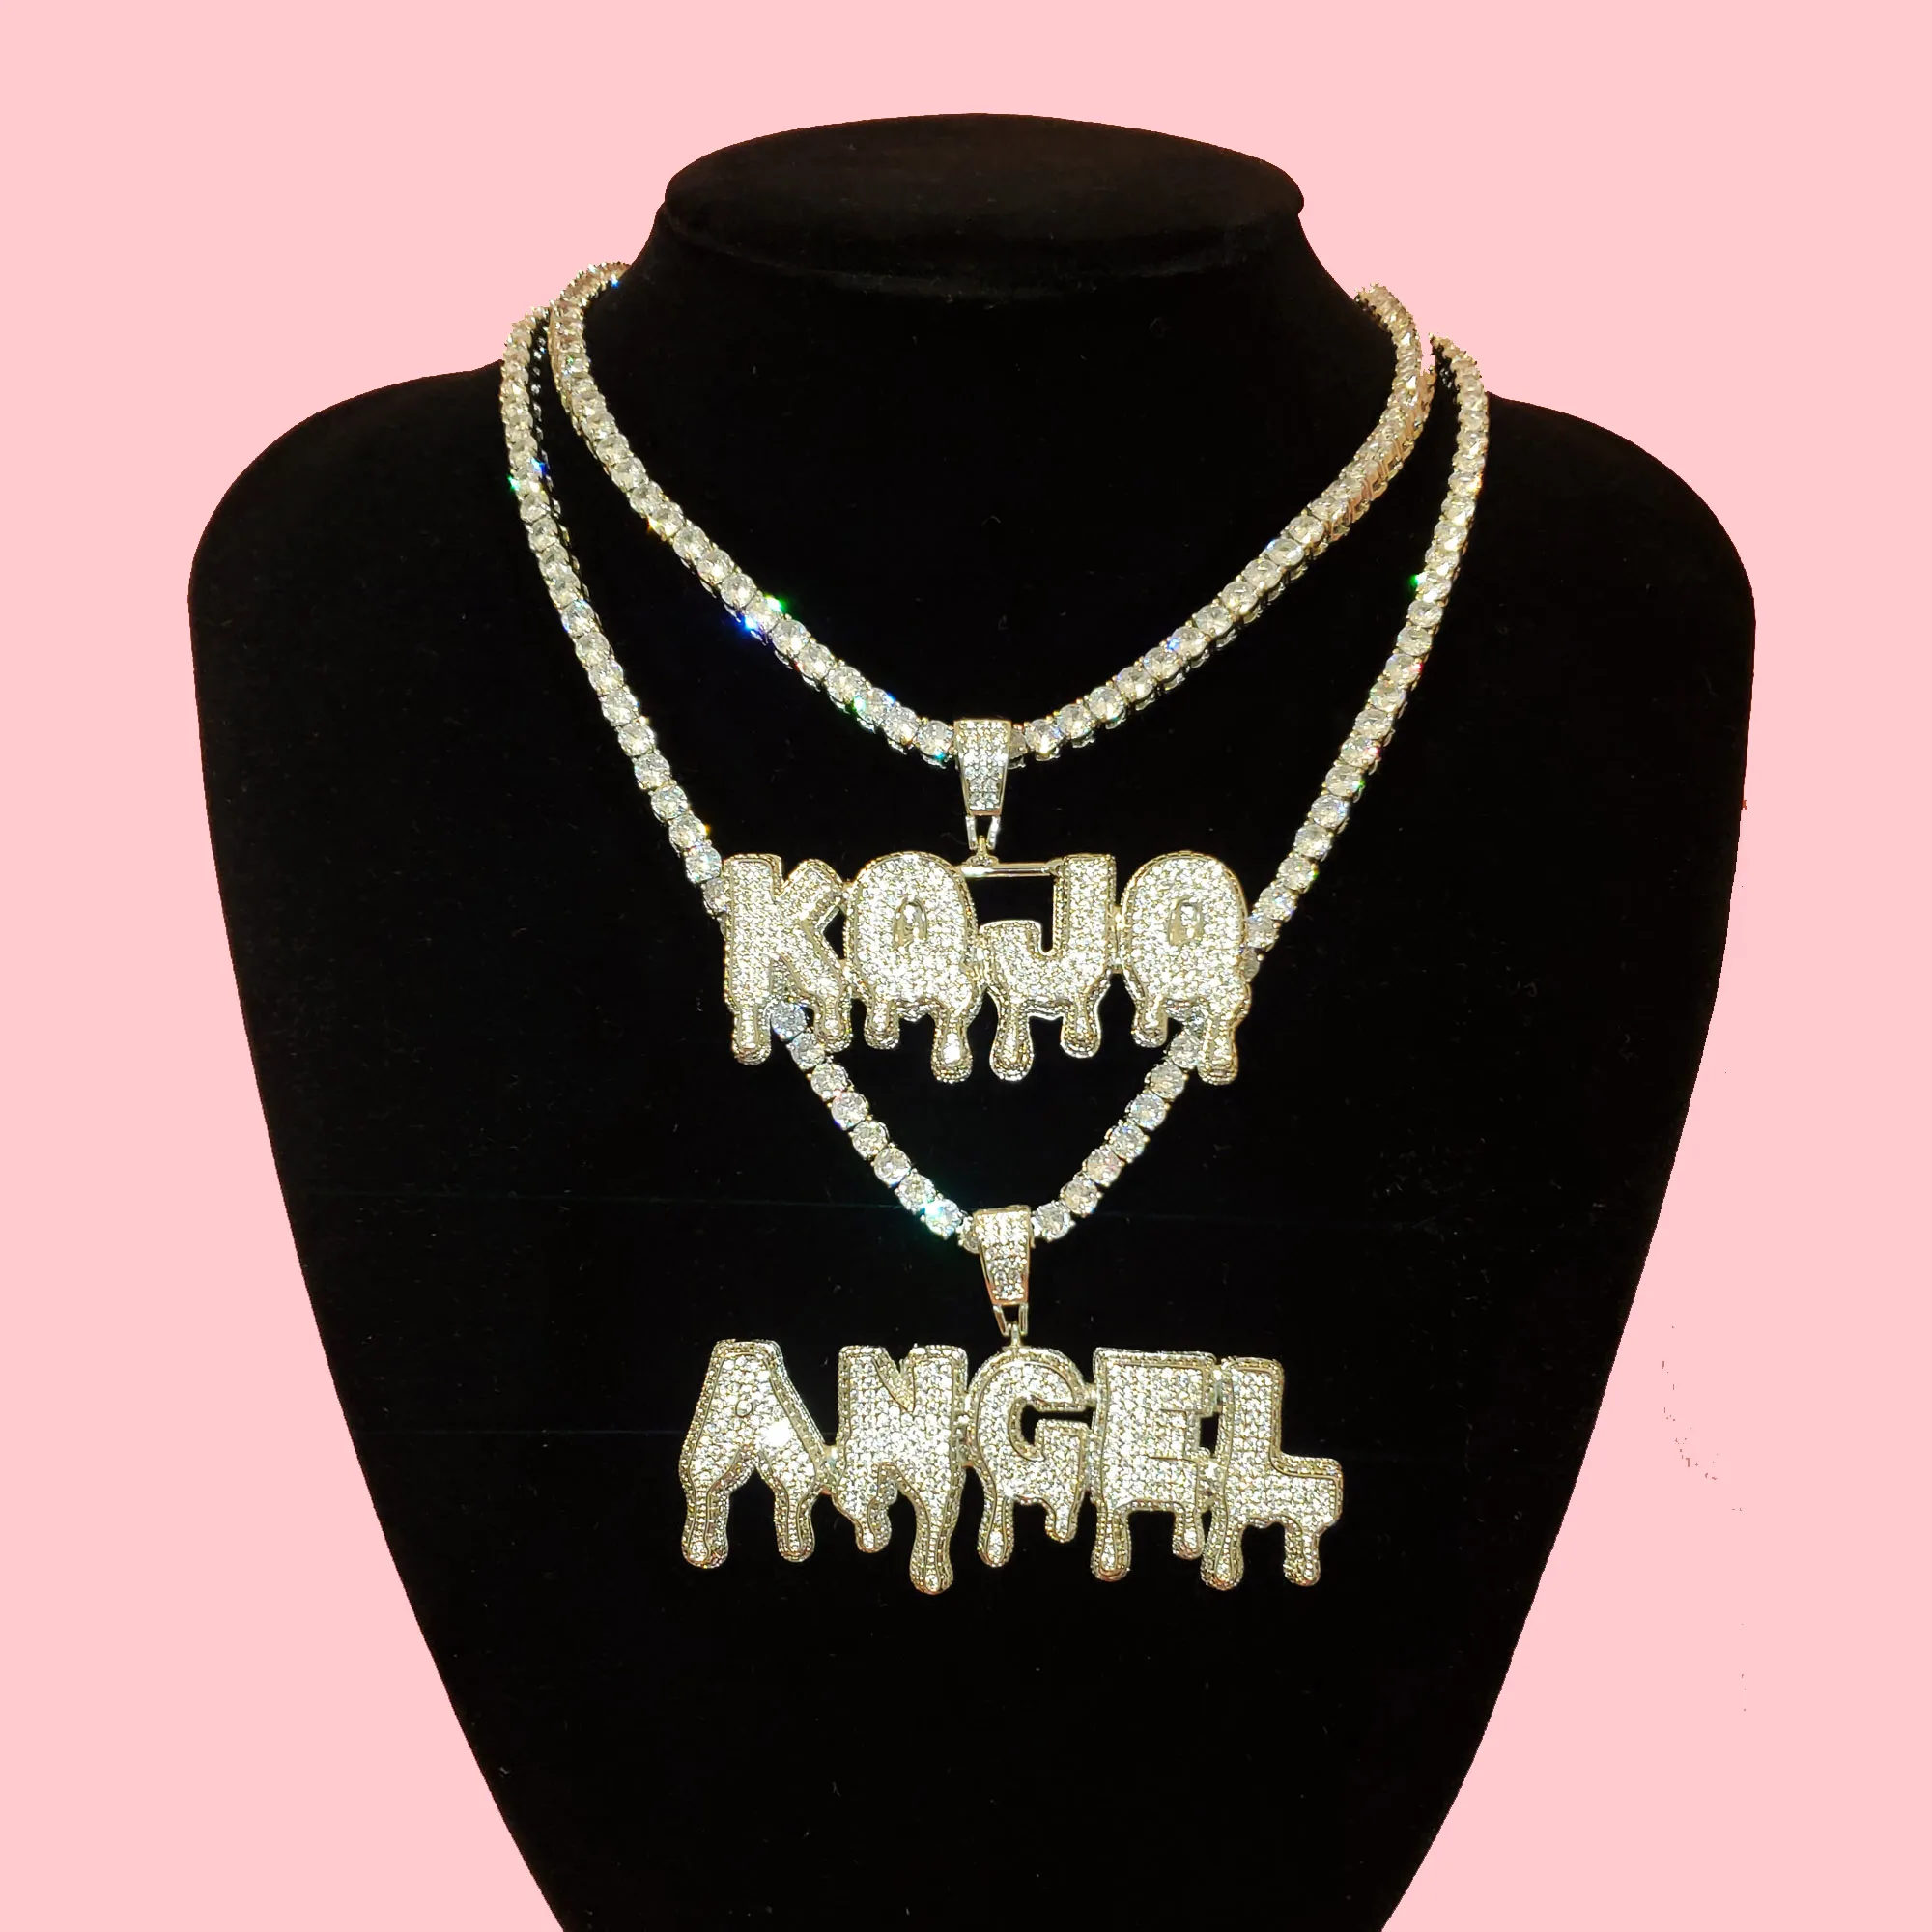 

CUSTOM Necklace Iced Out Drip Letters Initial Necklace Bling Bling Hip Hop Jewelry Personalized Nameplate with Icy Tennis Chain